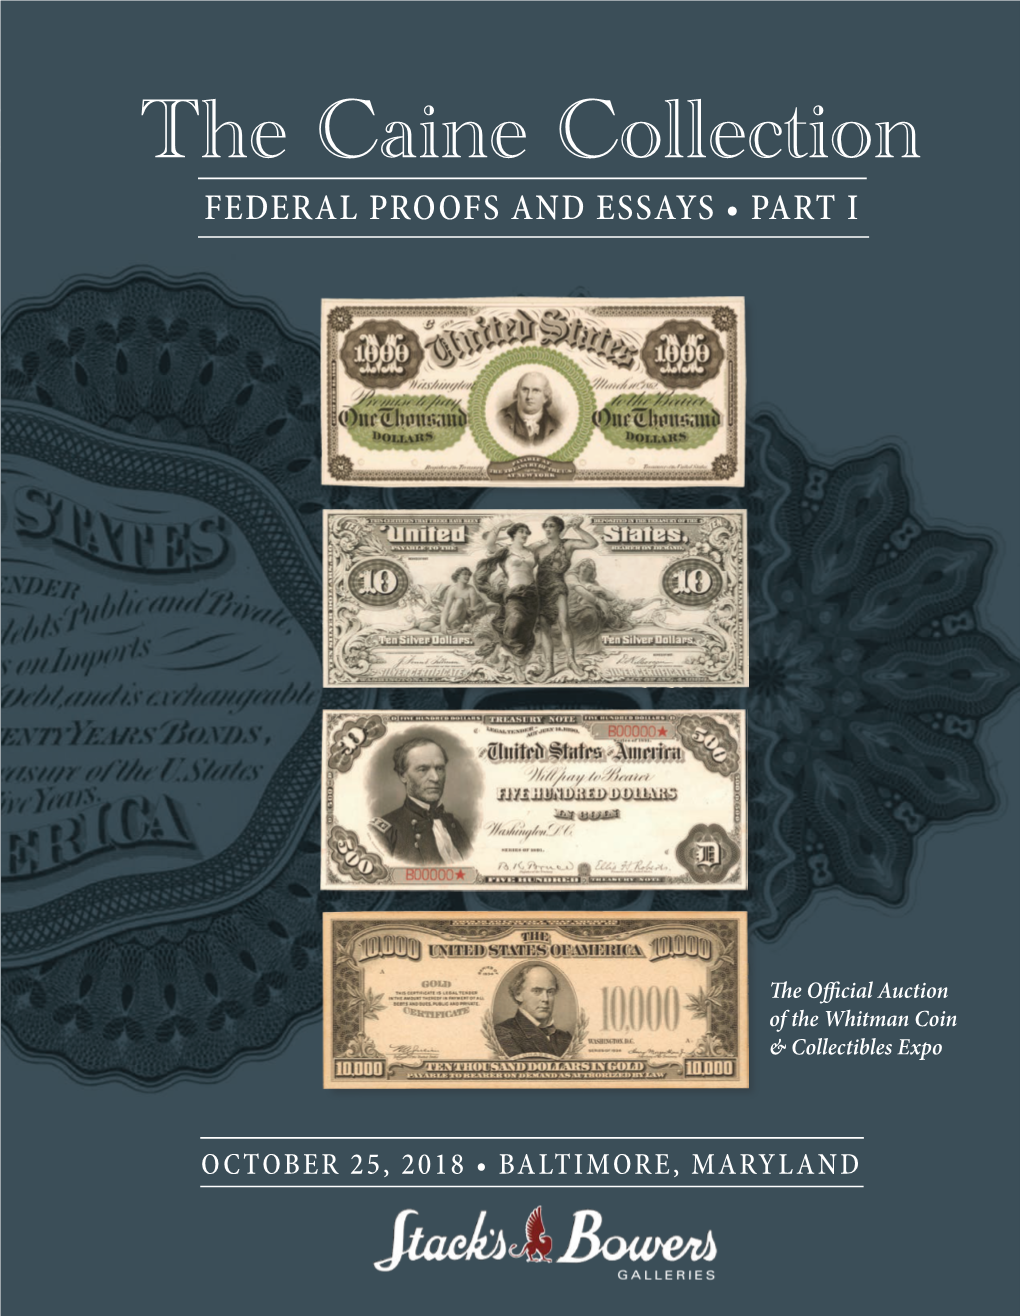 The Caine Collection FEDERAL PROOFS and ESSAYS • PART I the Caine Collection of Collection Proofsfederal Caine Essays and the • I Part